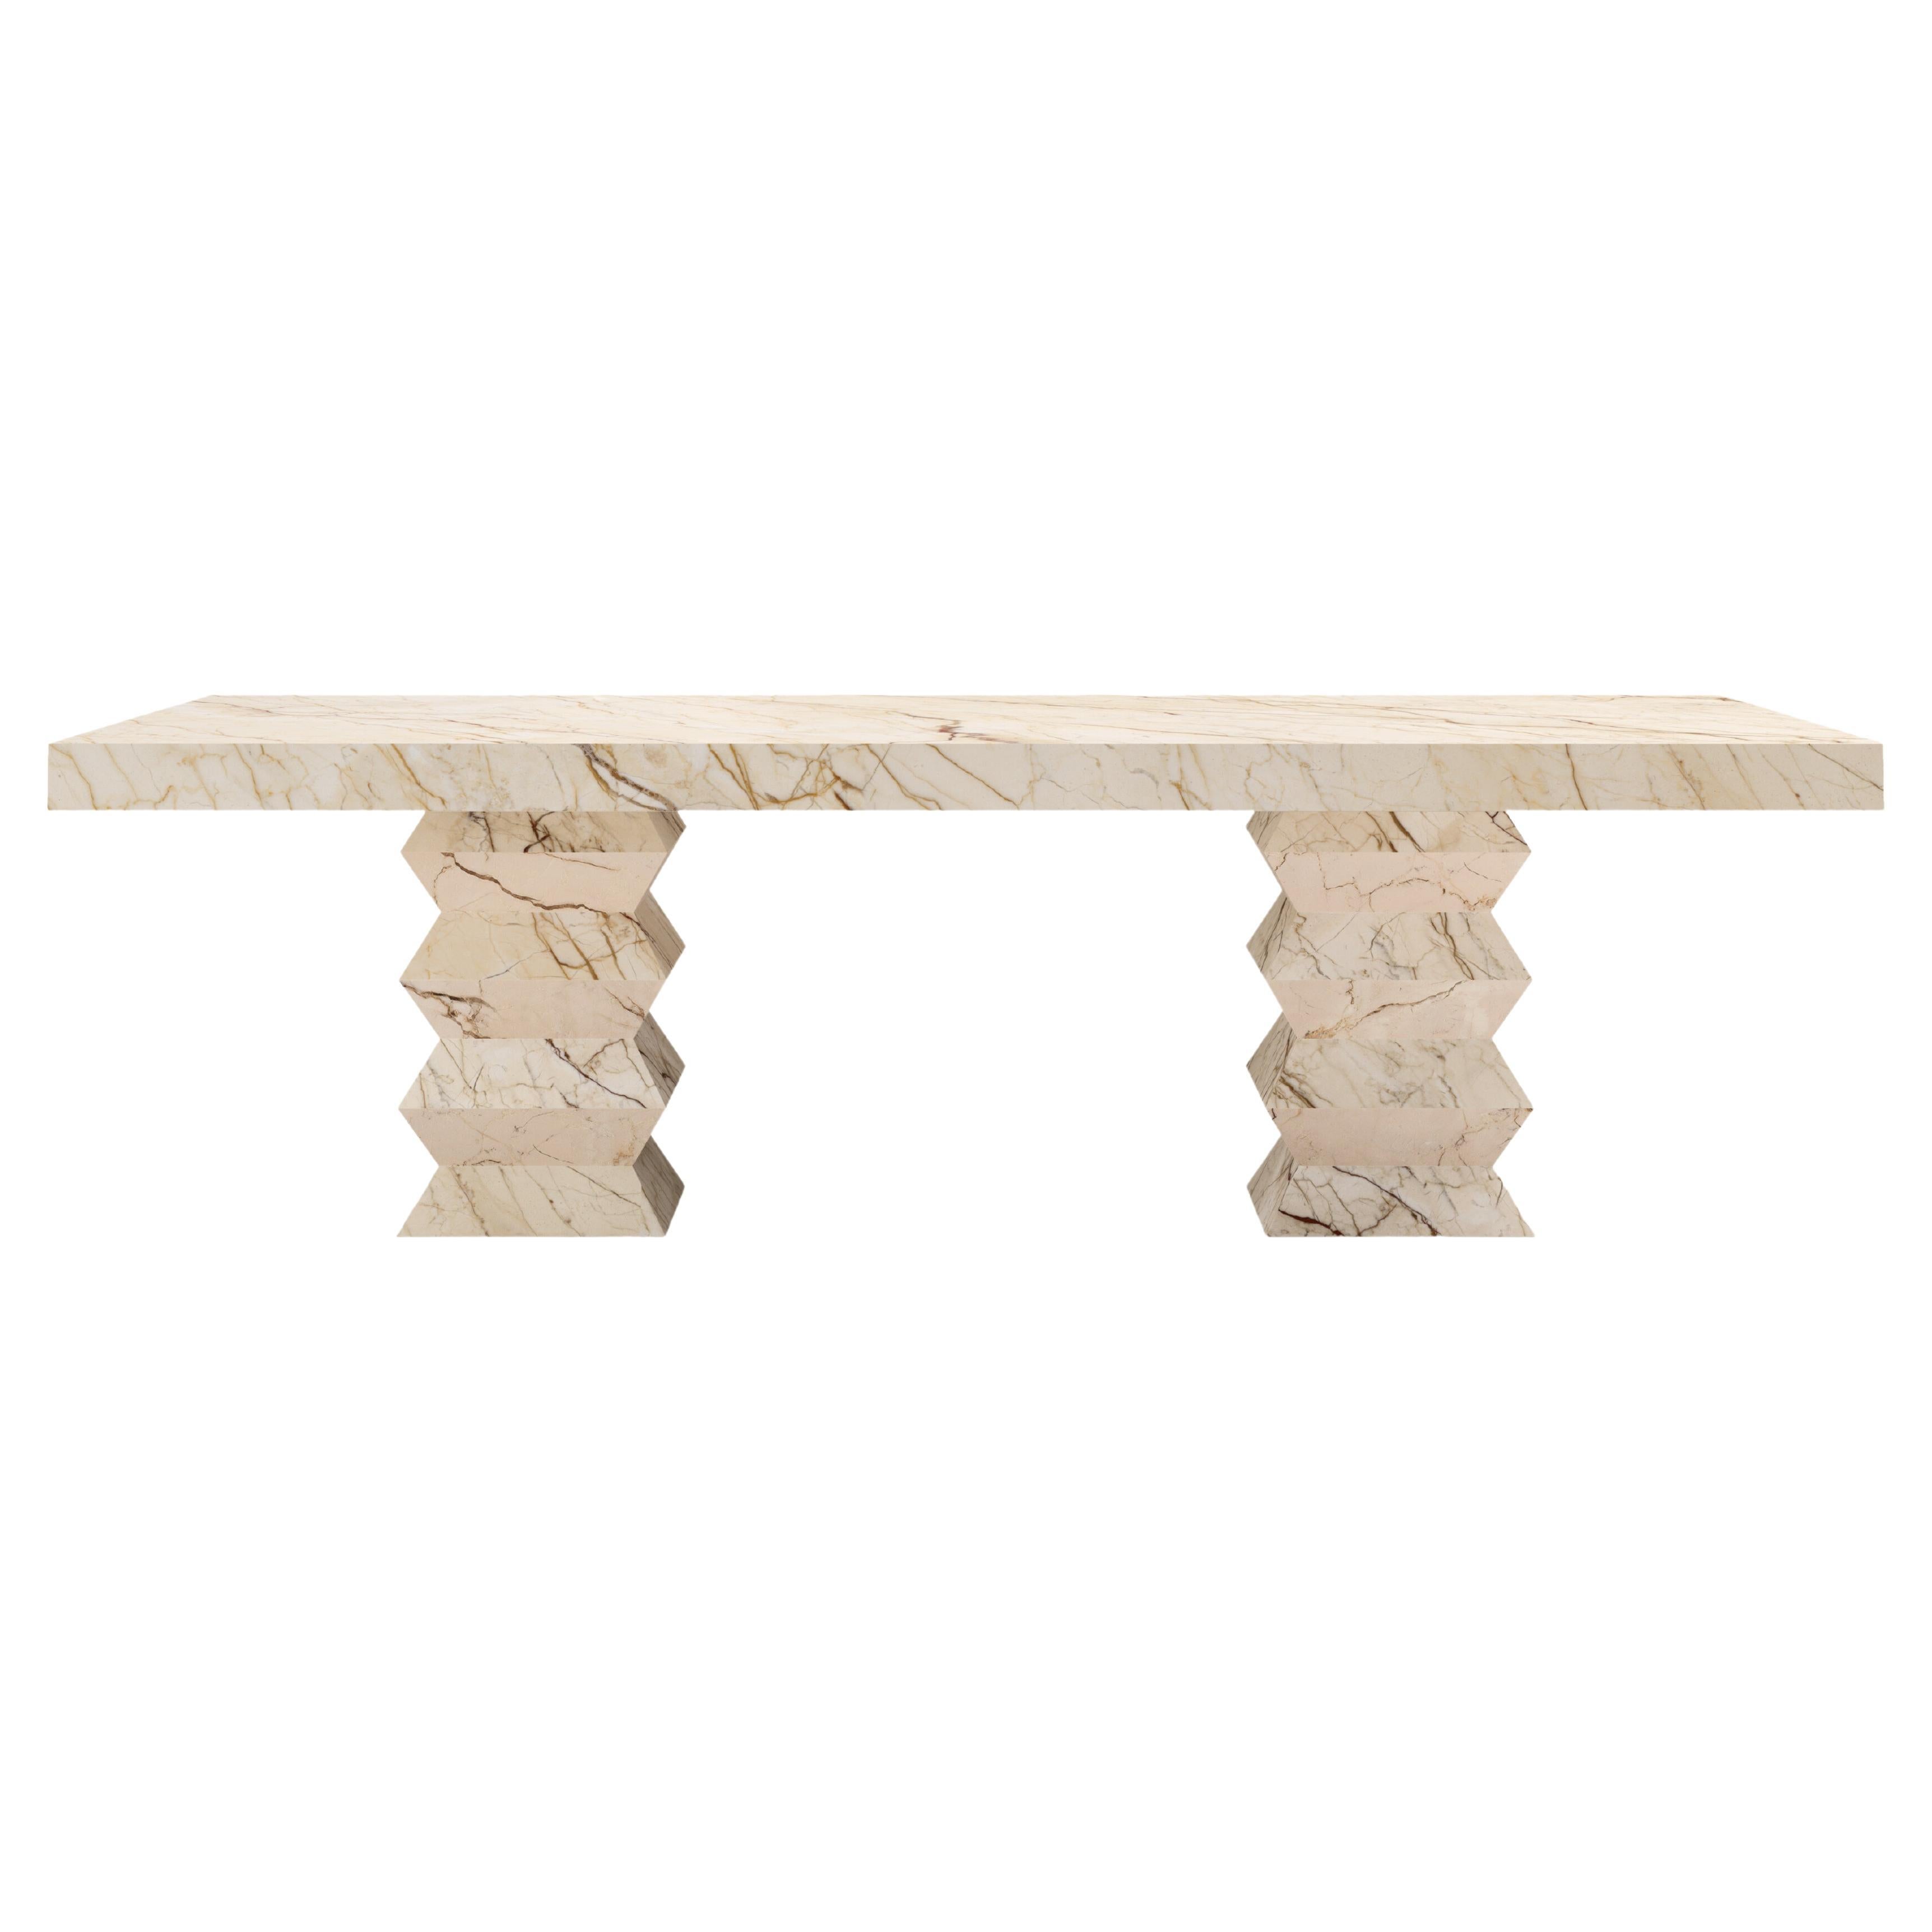 FORM(LA) Grinza Rectangle Dining Table 84"L x 42"W x 32"H Sofita Beige Marble For Sale